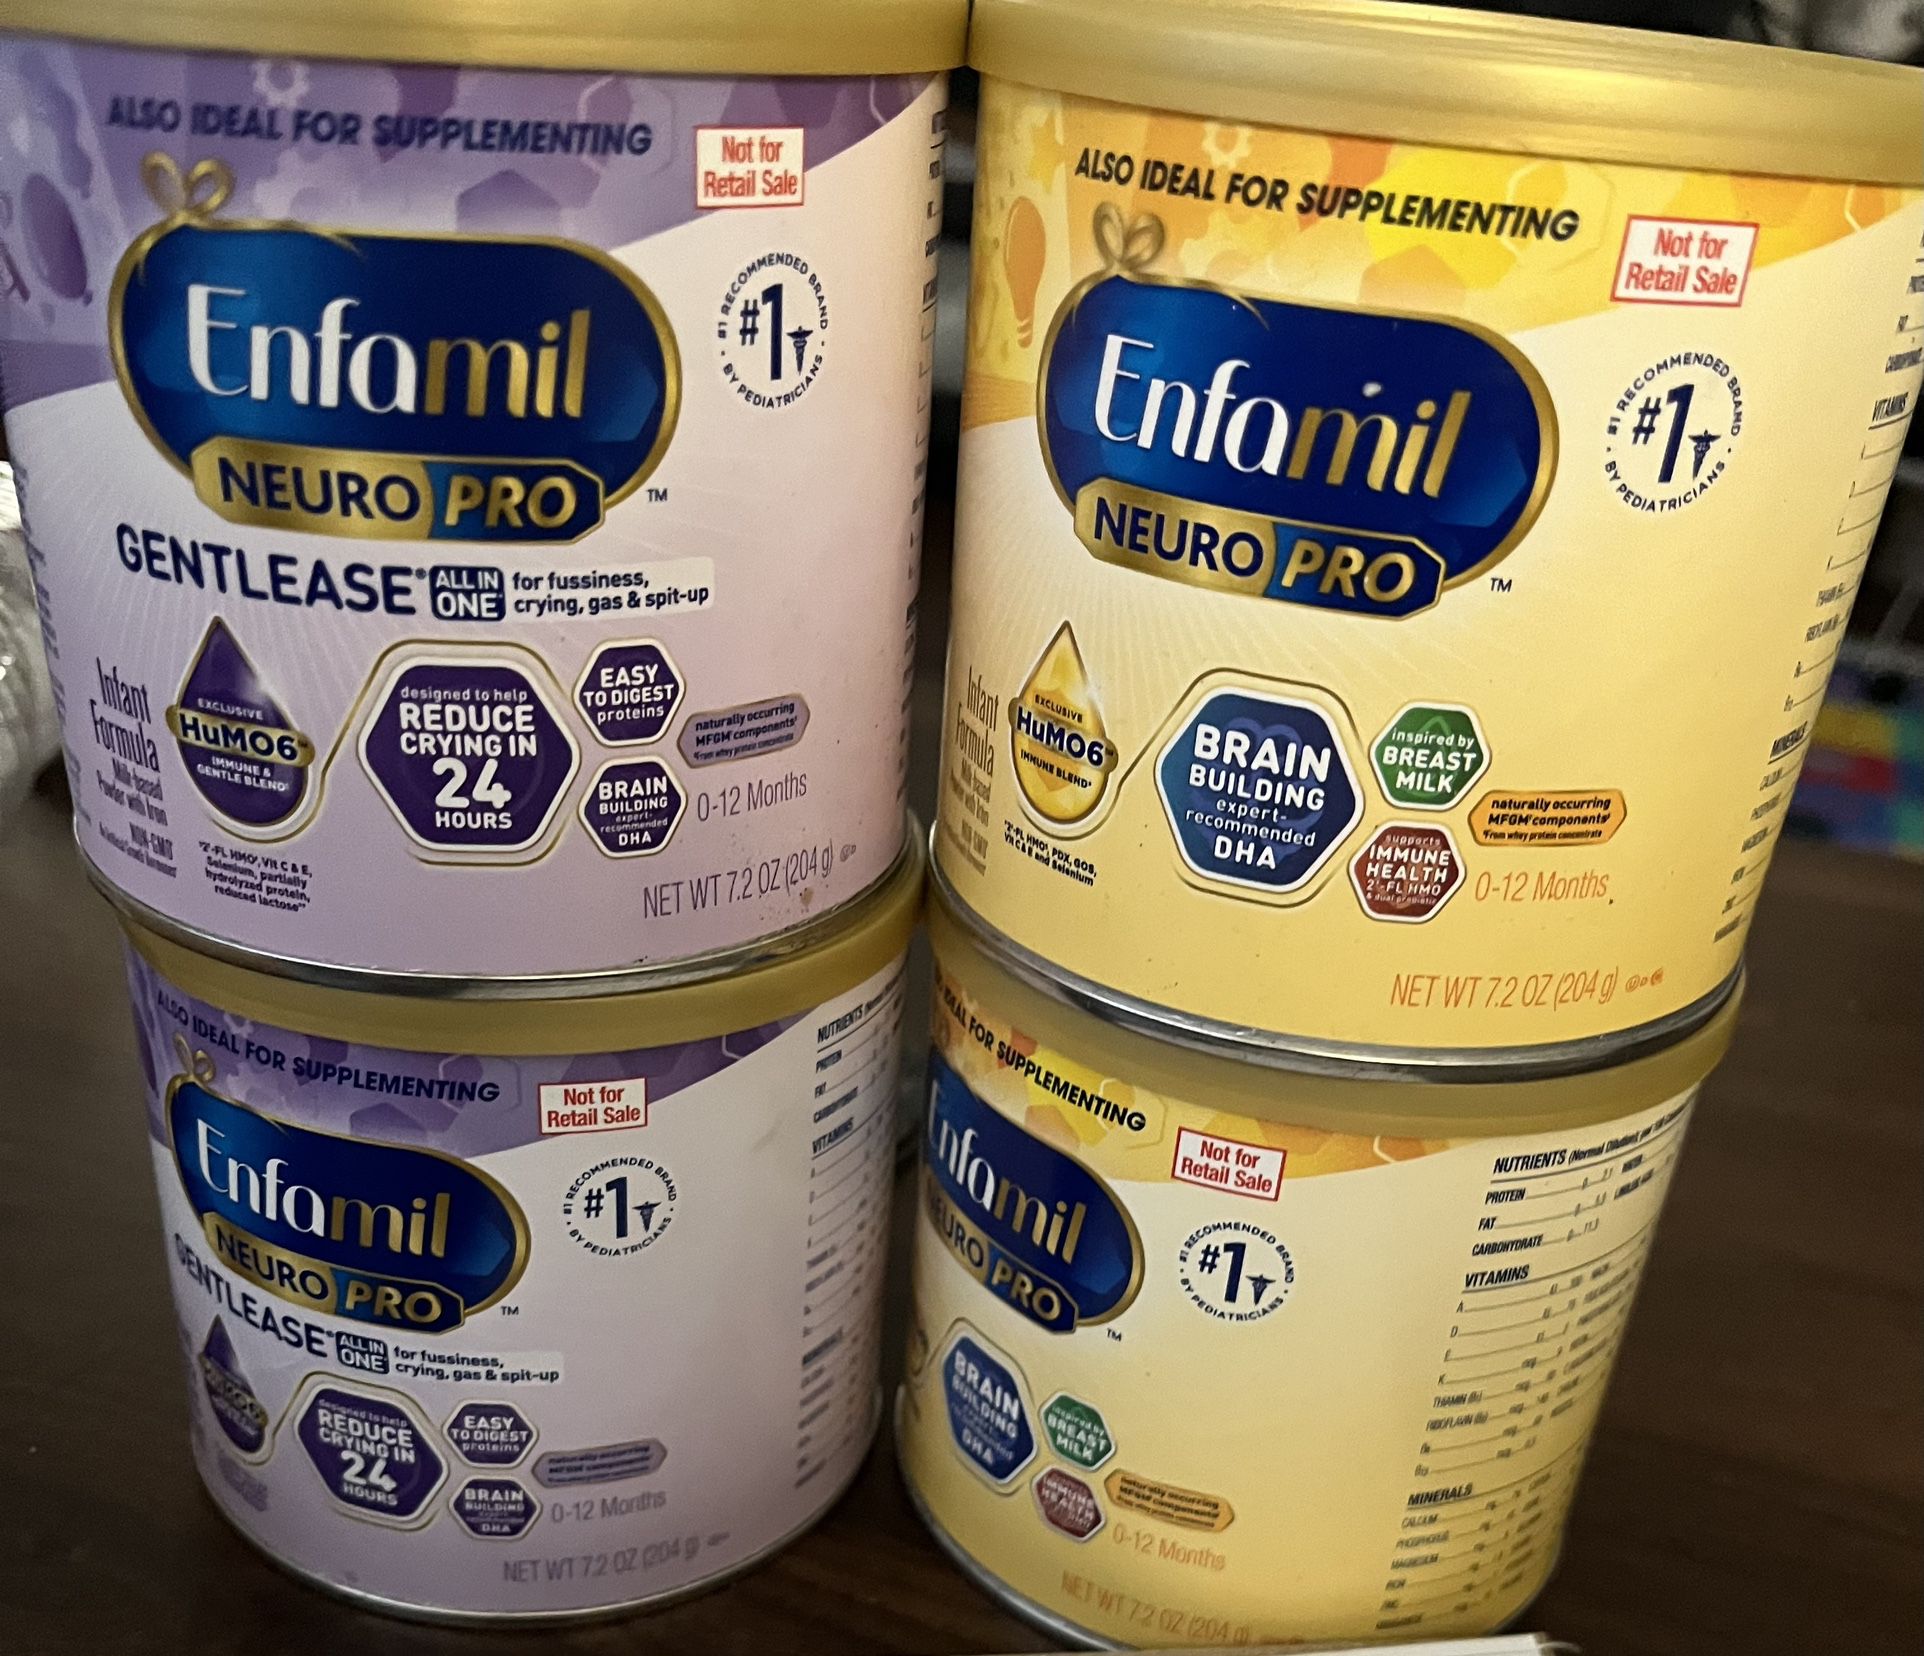 Total 8 formula powder New 4 similac and 4 enfamil  Expiry in sep 2025  All in 40 Each$5